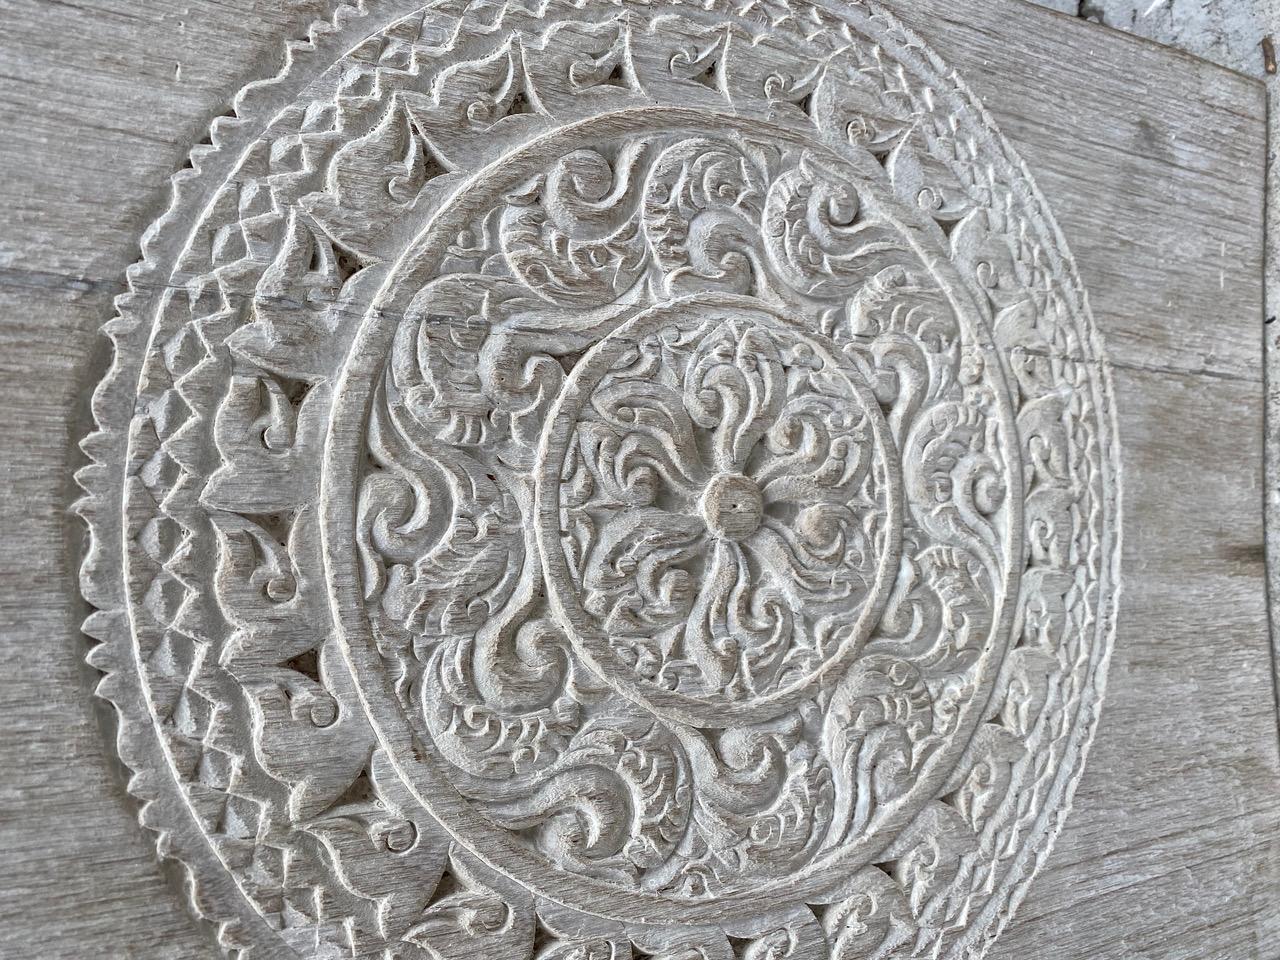 Antique hand carved merbau wood panel from Lampung, Sumatra. We have a collection in various sizes all white washed. Please inquire. The size and price reflect the one shown. Stunning on both sides.

This panel was sourced in the spirit of wabi